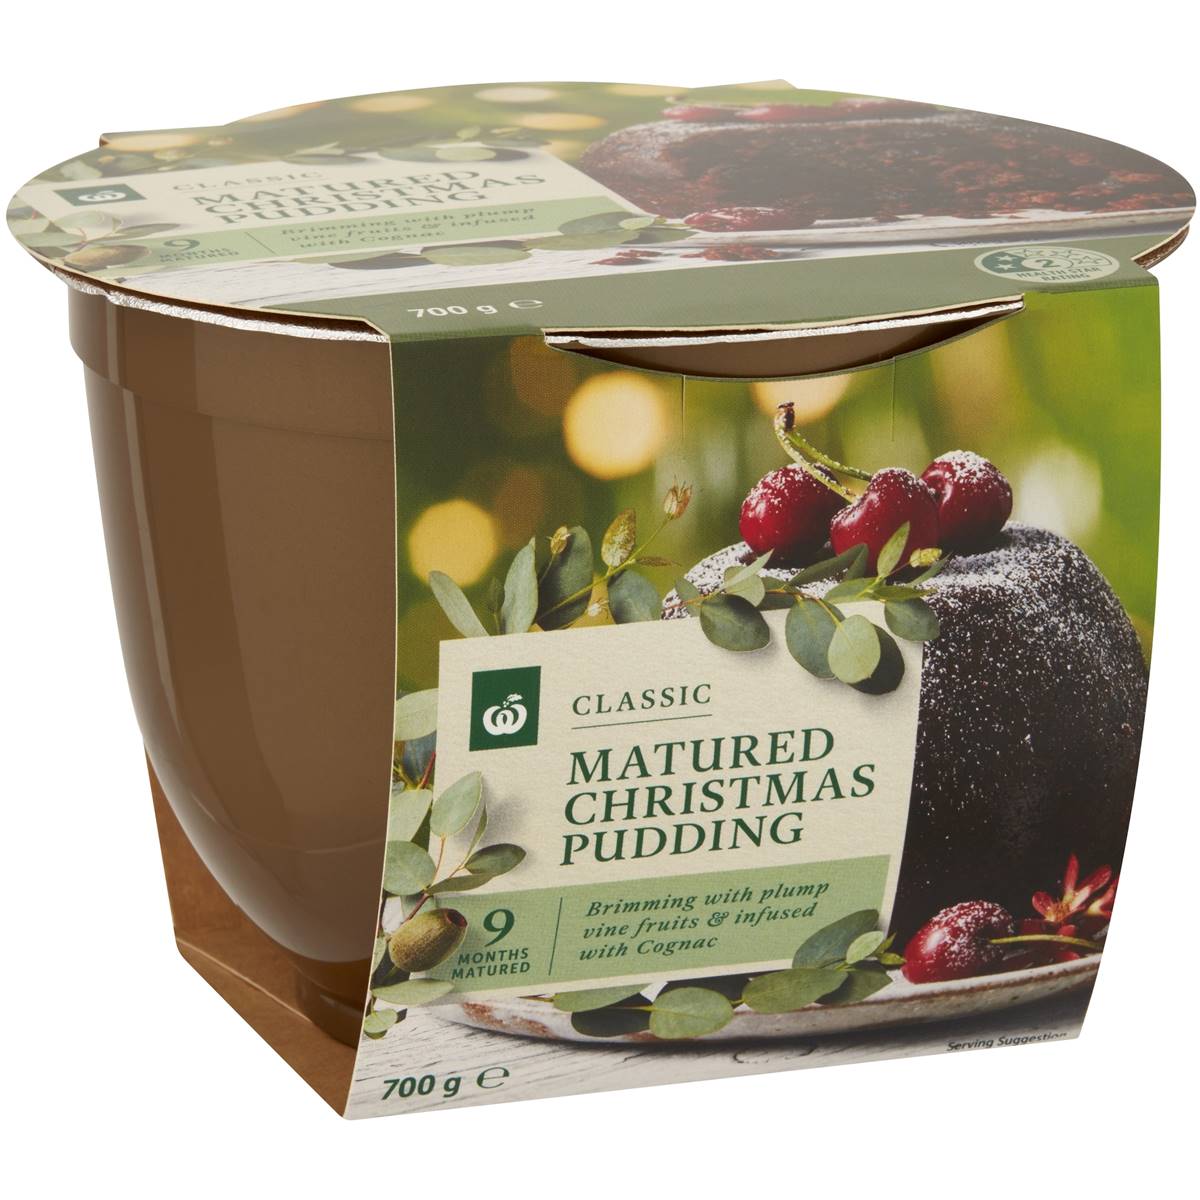 Calories in Woolworths Matured Christmas Pudding Pudding